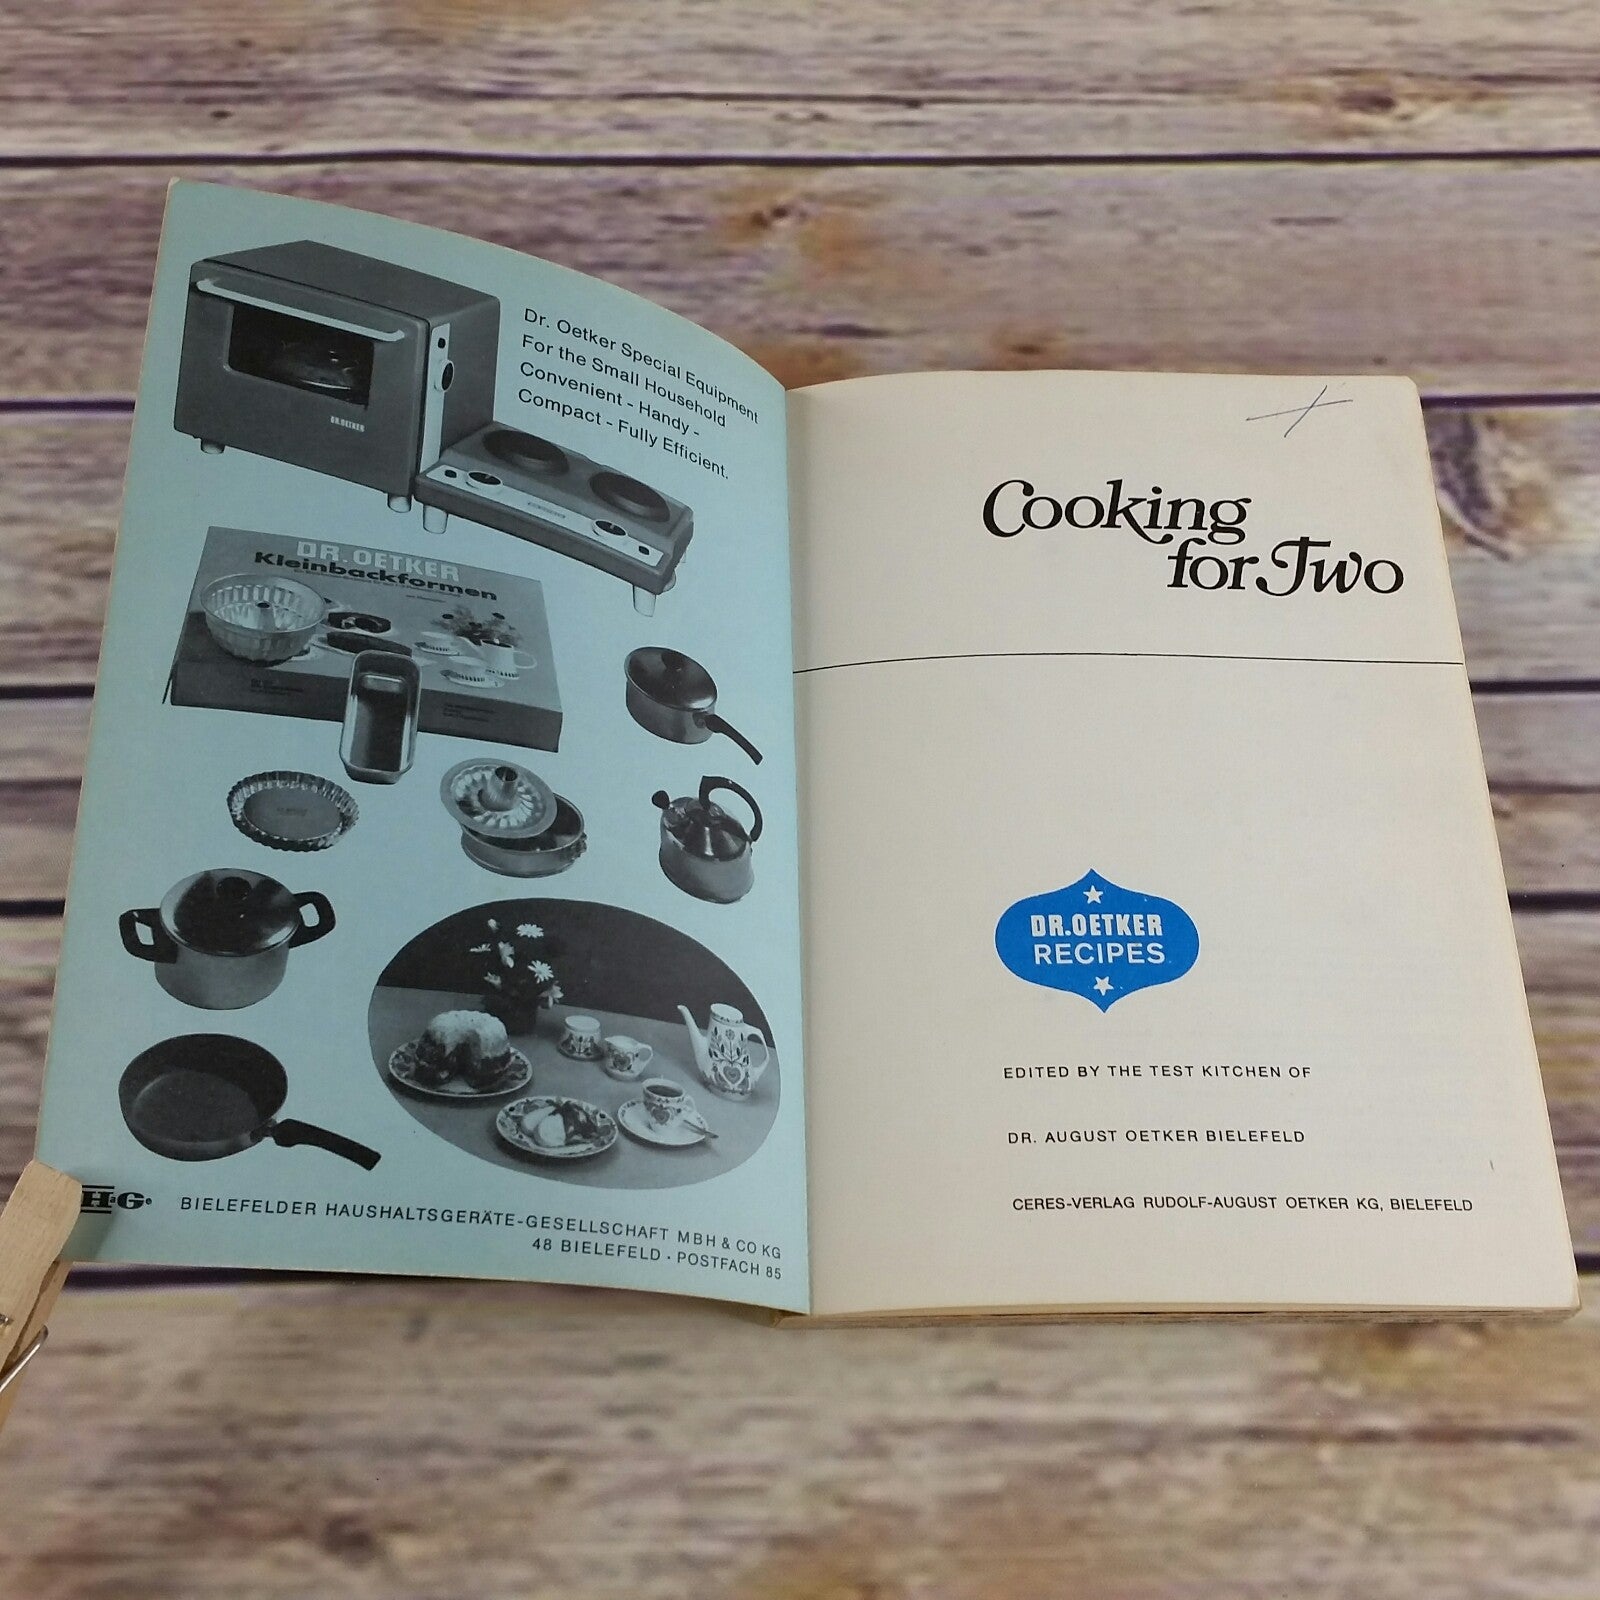 Vintage Cookbook Dr Oetker Cooking for Two 1972 Paperback Recipes English Language - At Grandma's Table